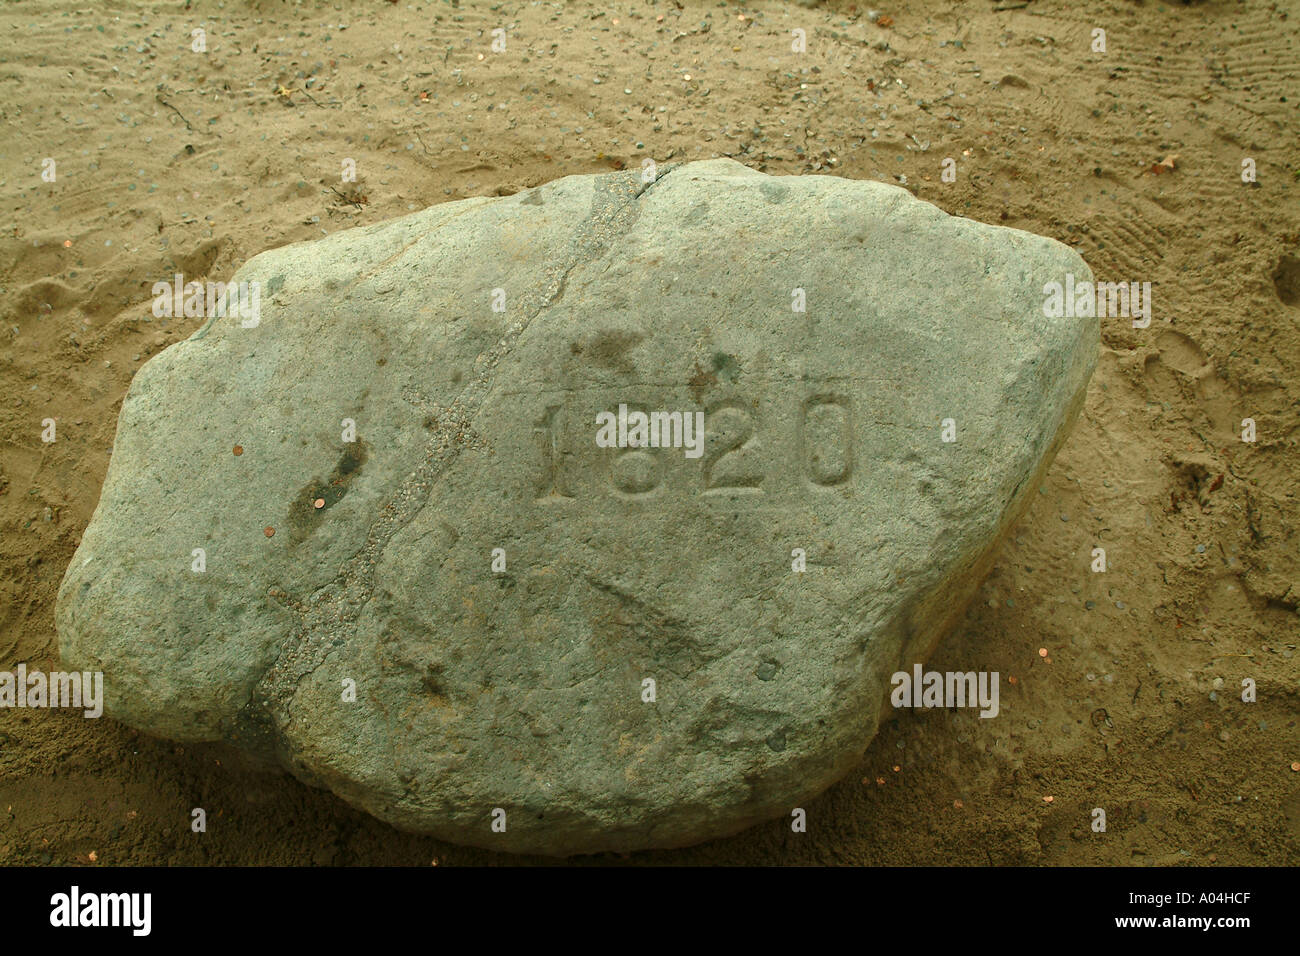 Plymouth rock site of the landing of the pilgrim Fathers Massachusetts MA USA Stock Photo